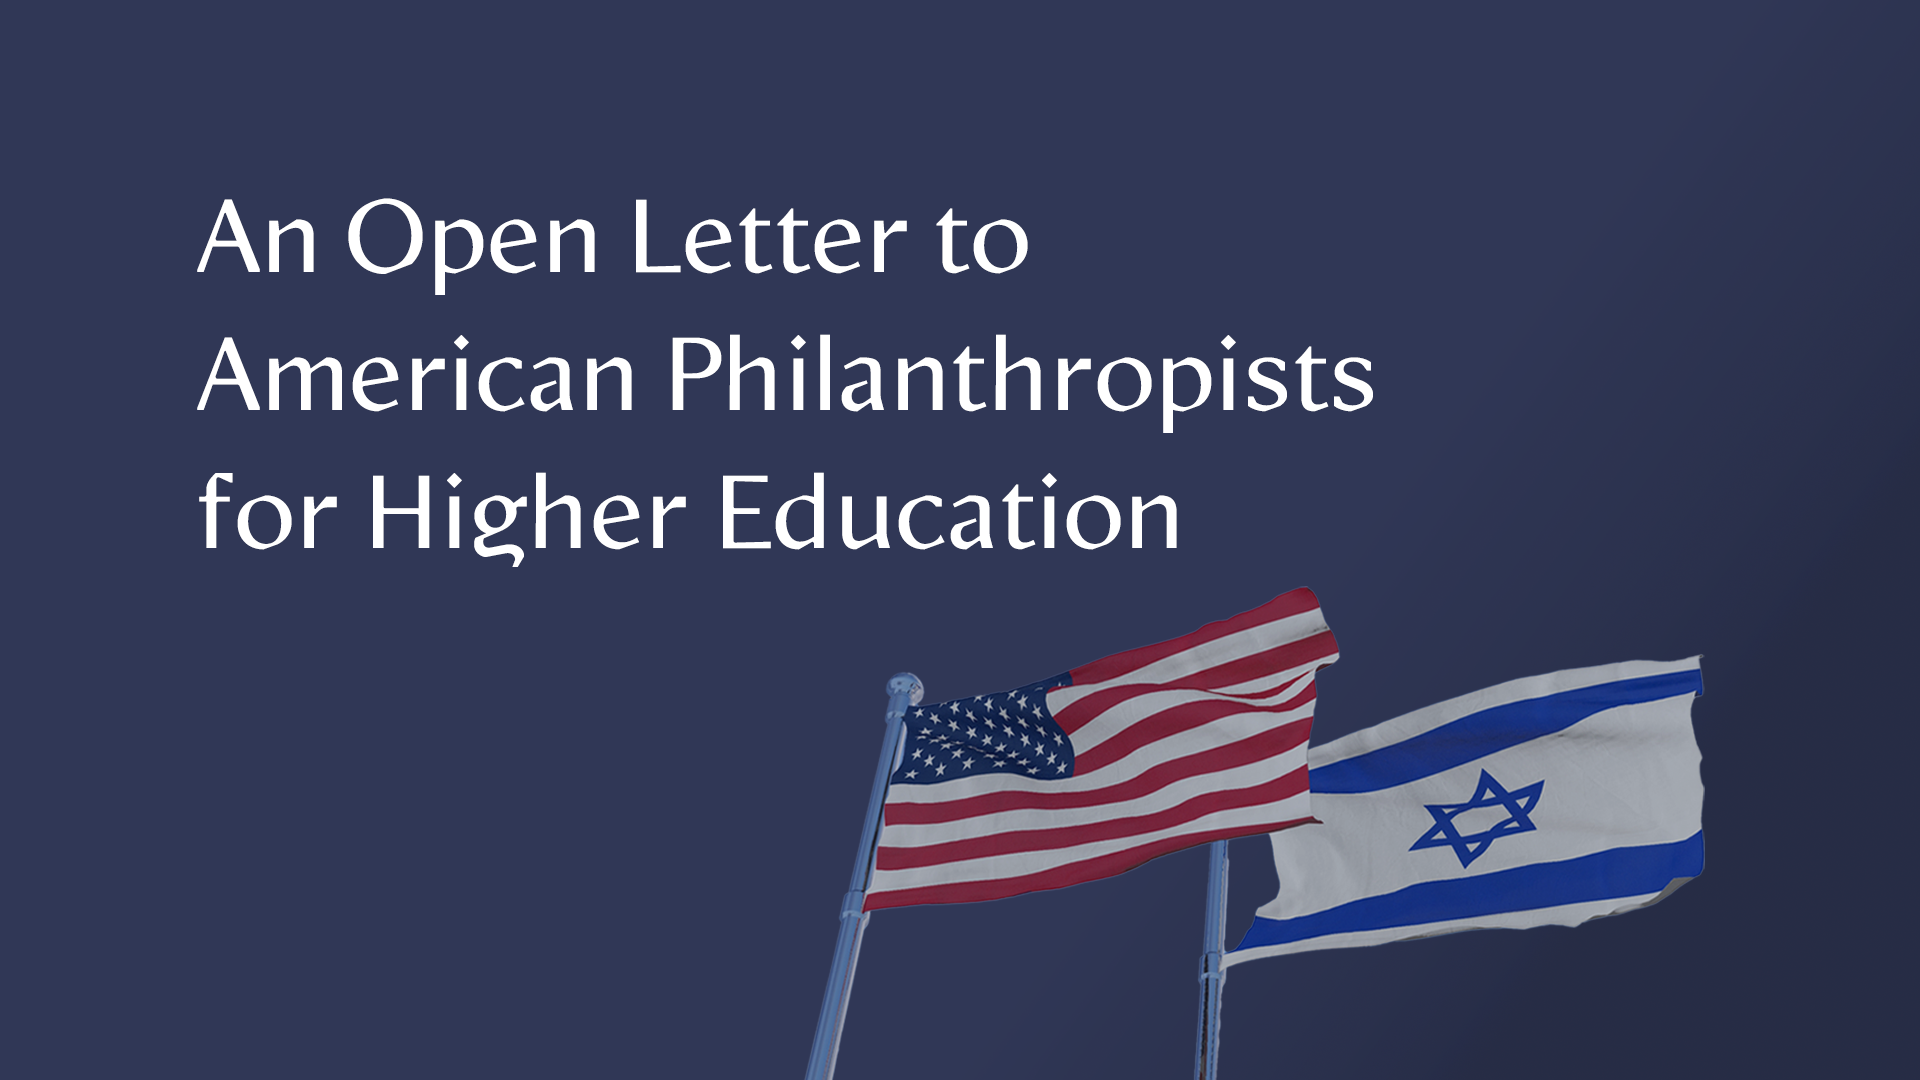 An Open Letter to American Philanthropists for Higher Education